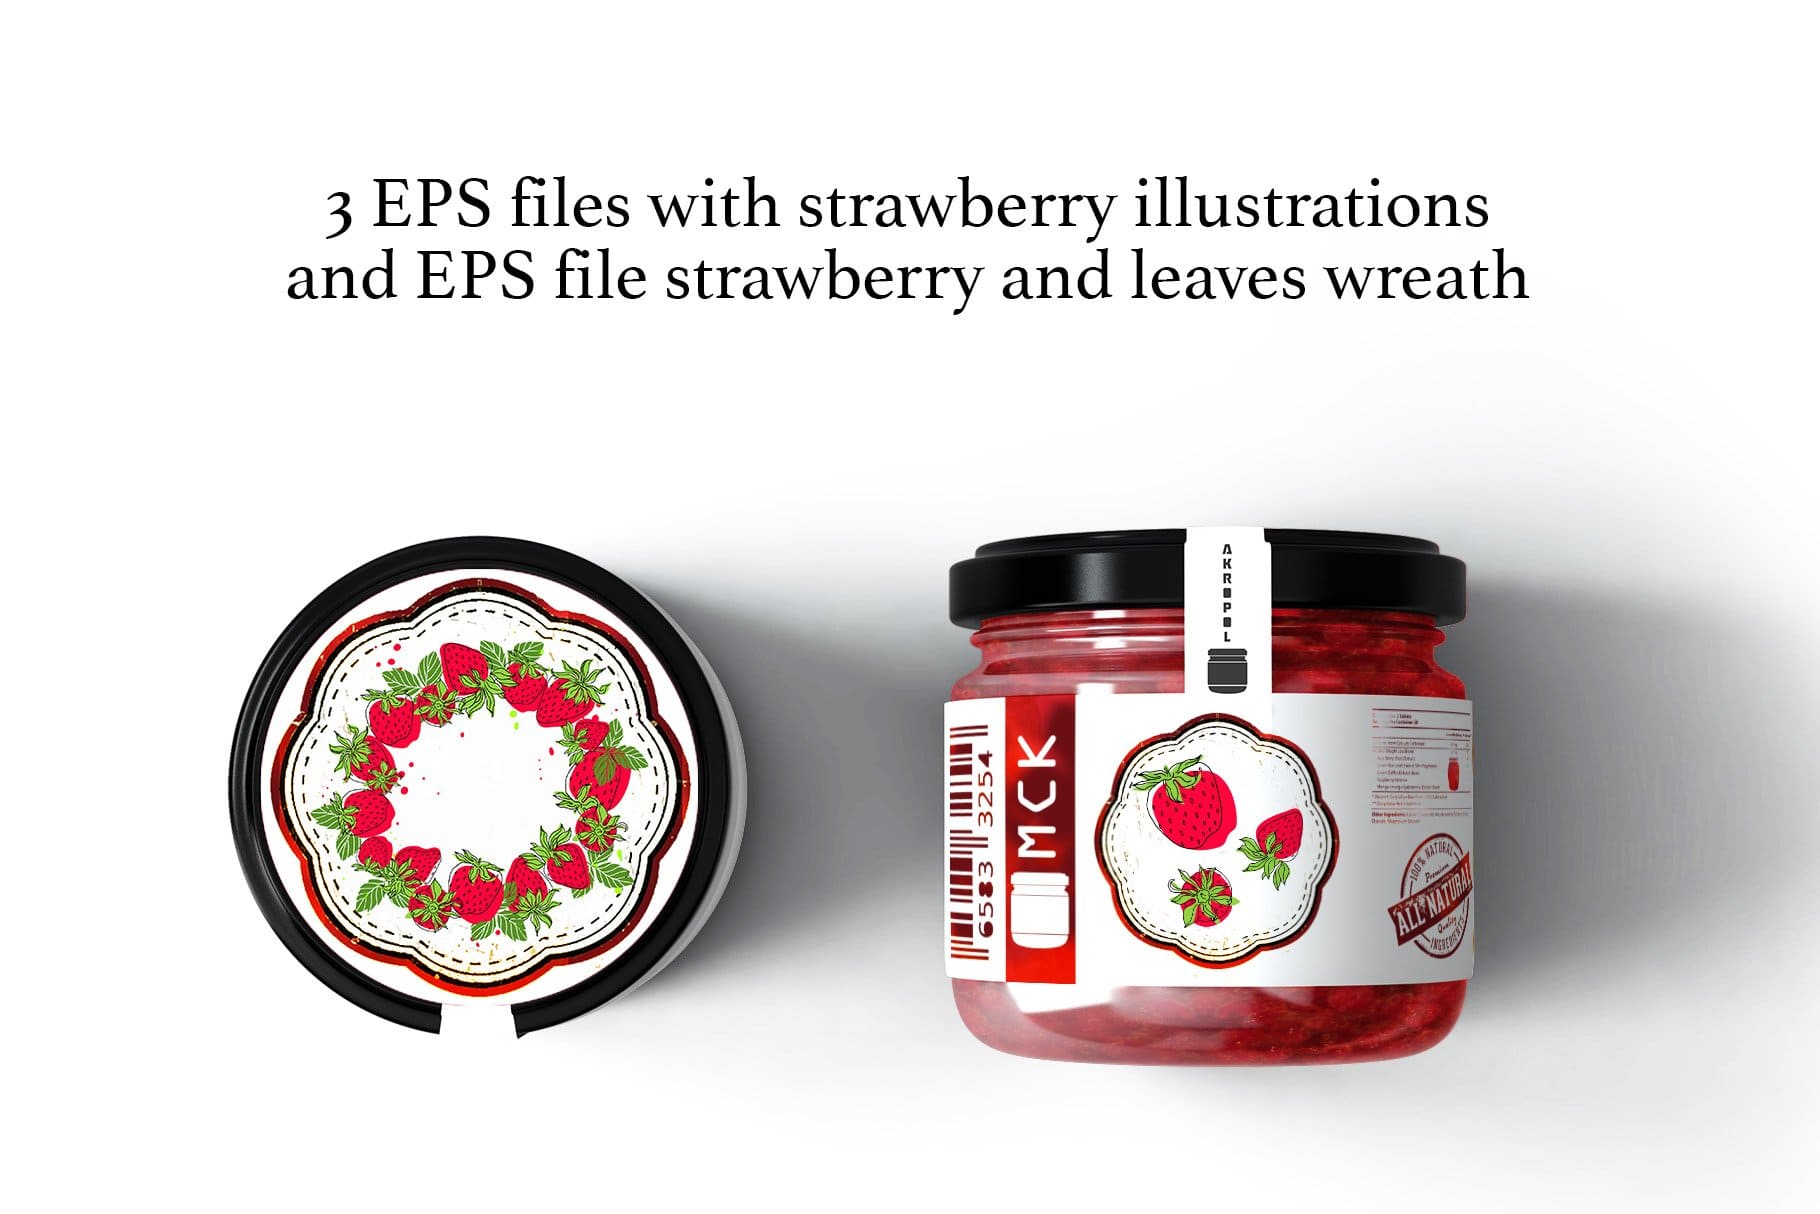 3 EPS files with strawberry illustrations and EPS file strawberry and leaves wreath.